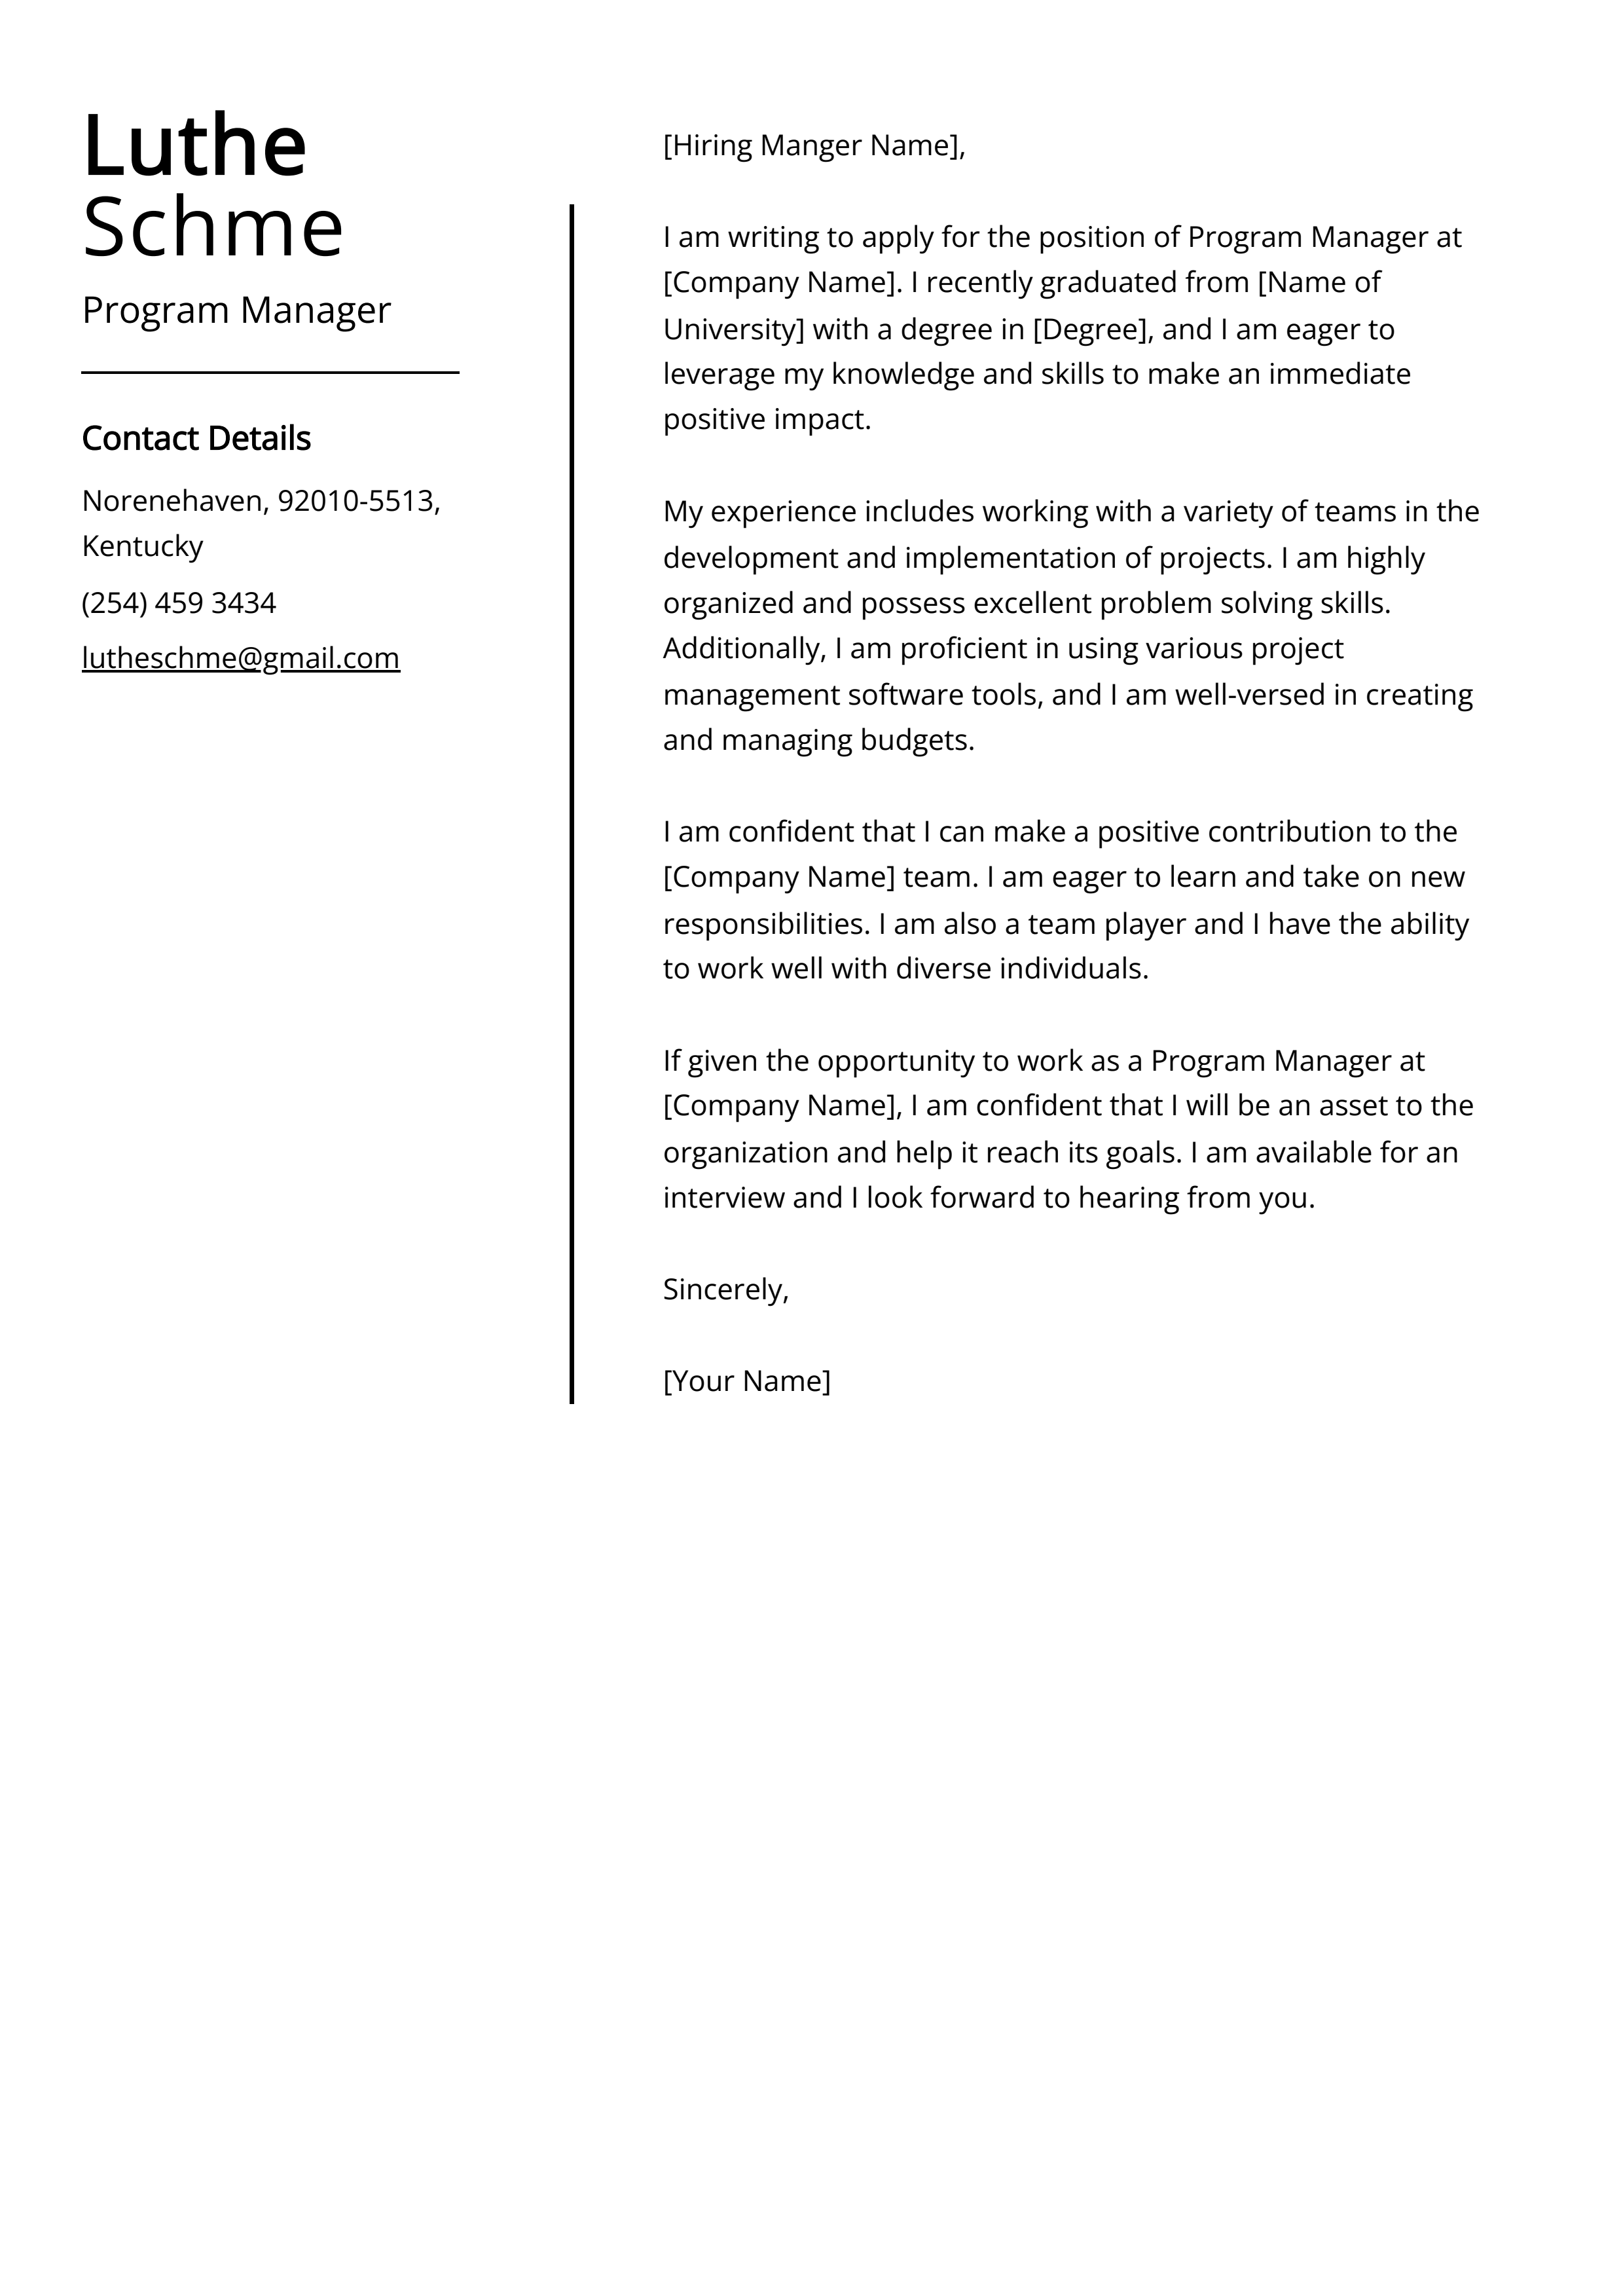 Program Manager Cover Letter Example